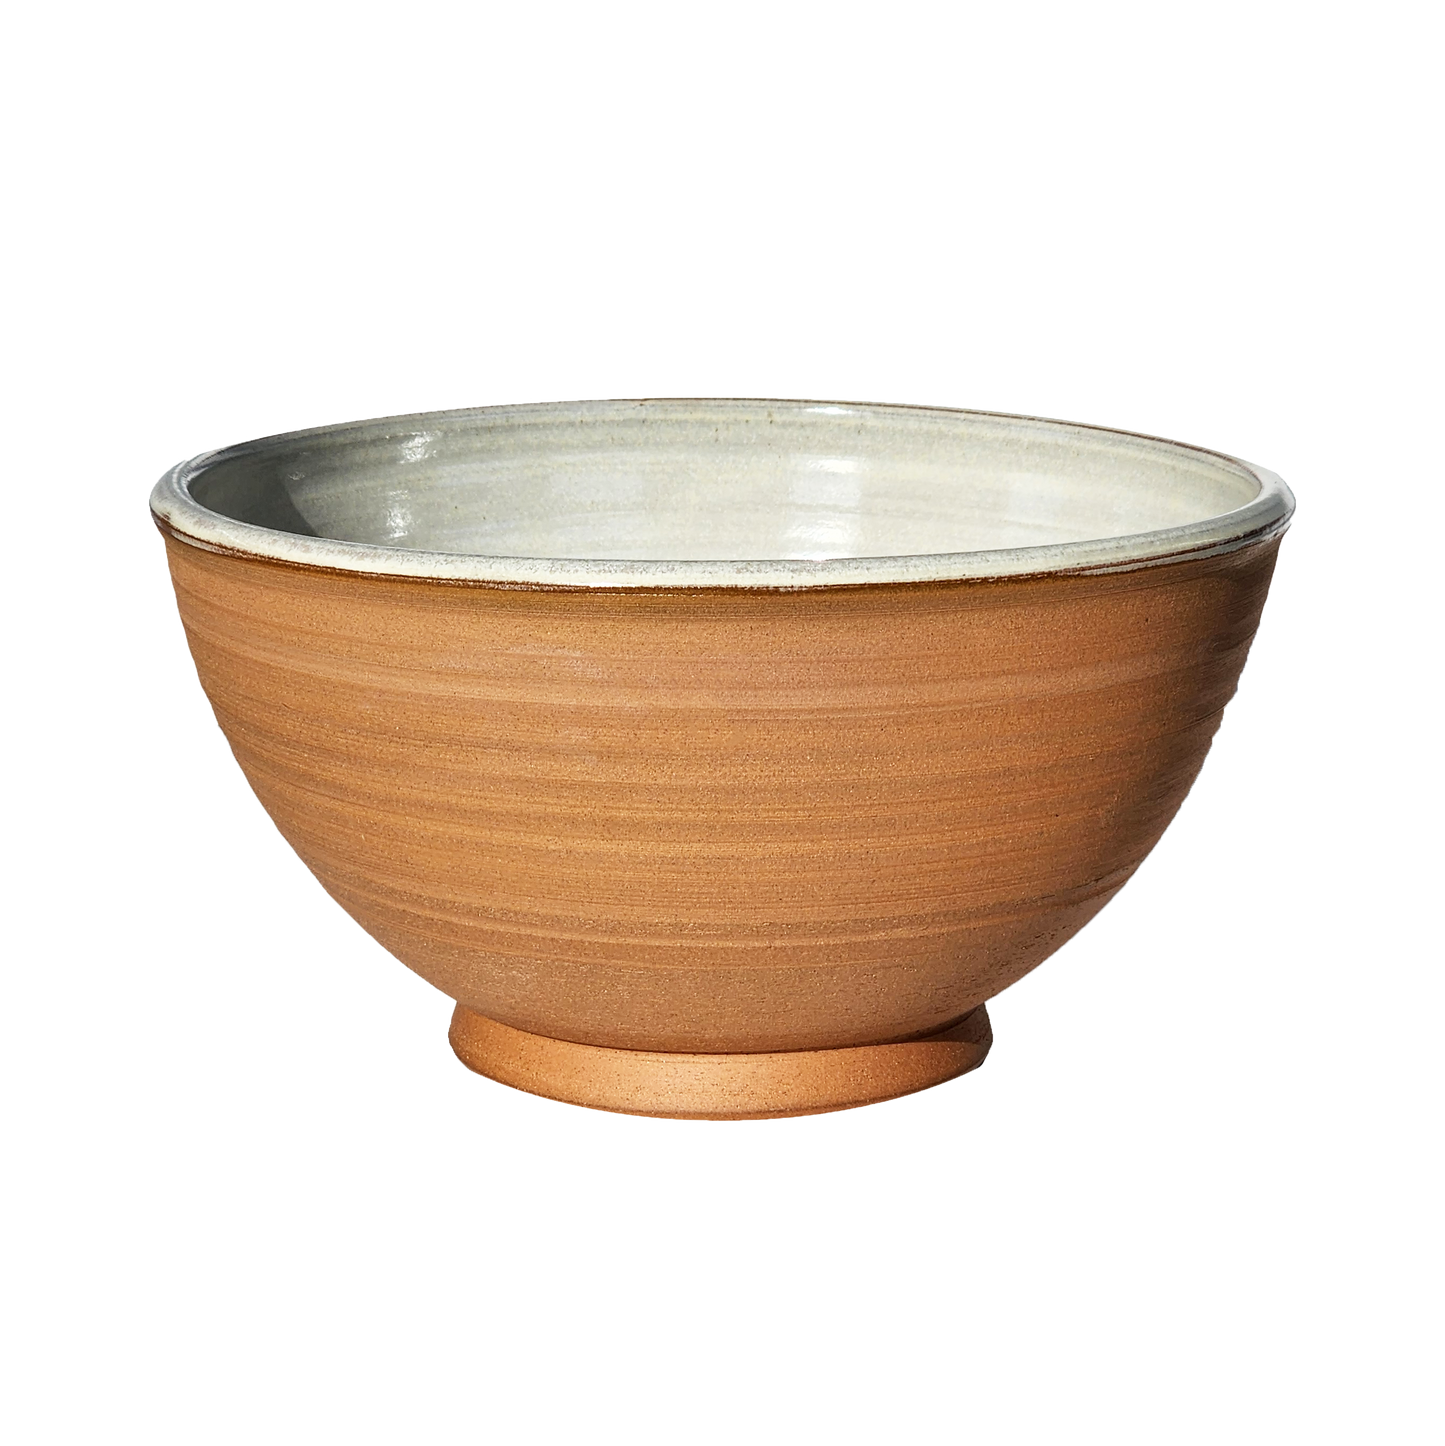 Image: A large mixing bowl in natural, unglazed ceramic, featuring a spacious design with a capacity of 12.5 cups. Embrace the rustic charm and simplicity of this earthy hue.